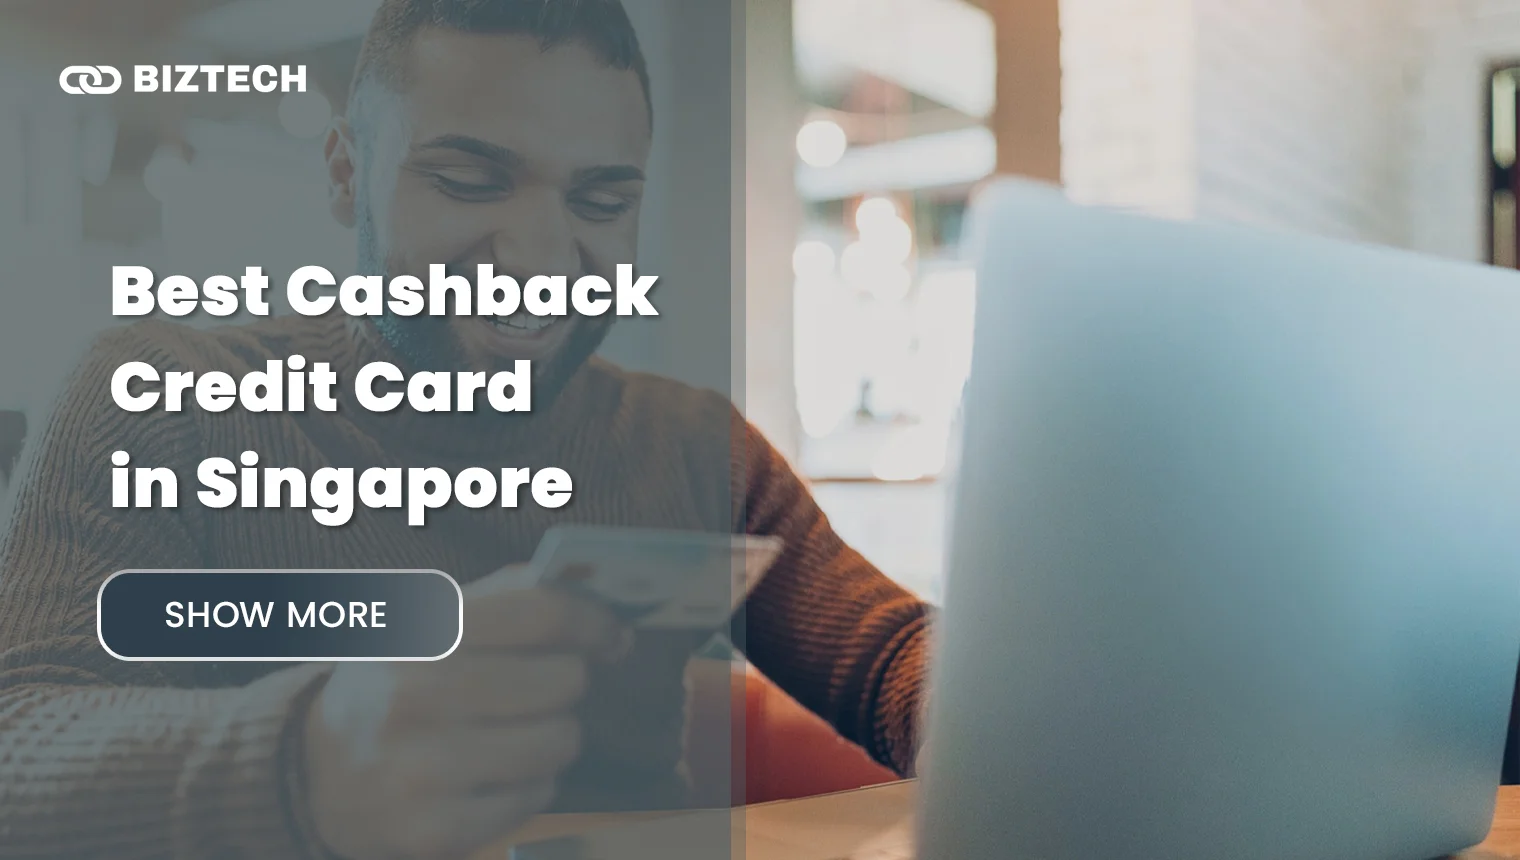 Best Cashback Credit Card in Singapore